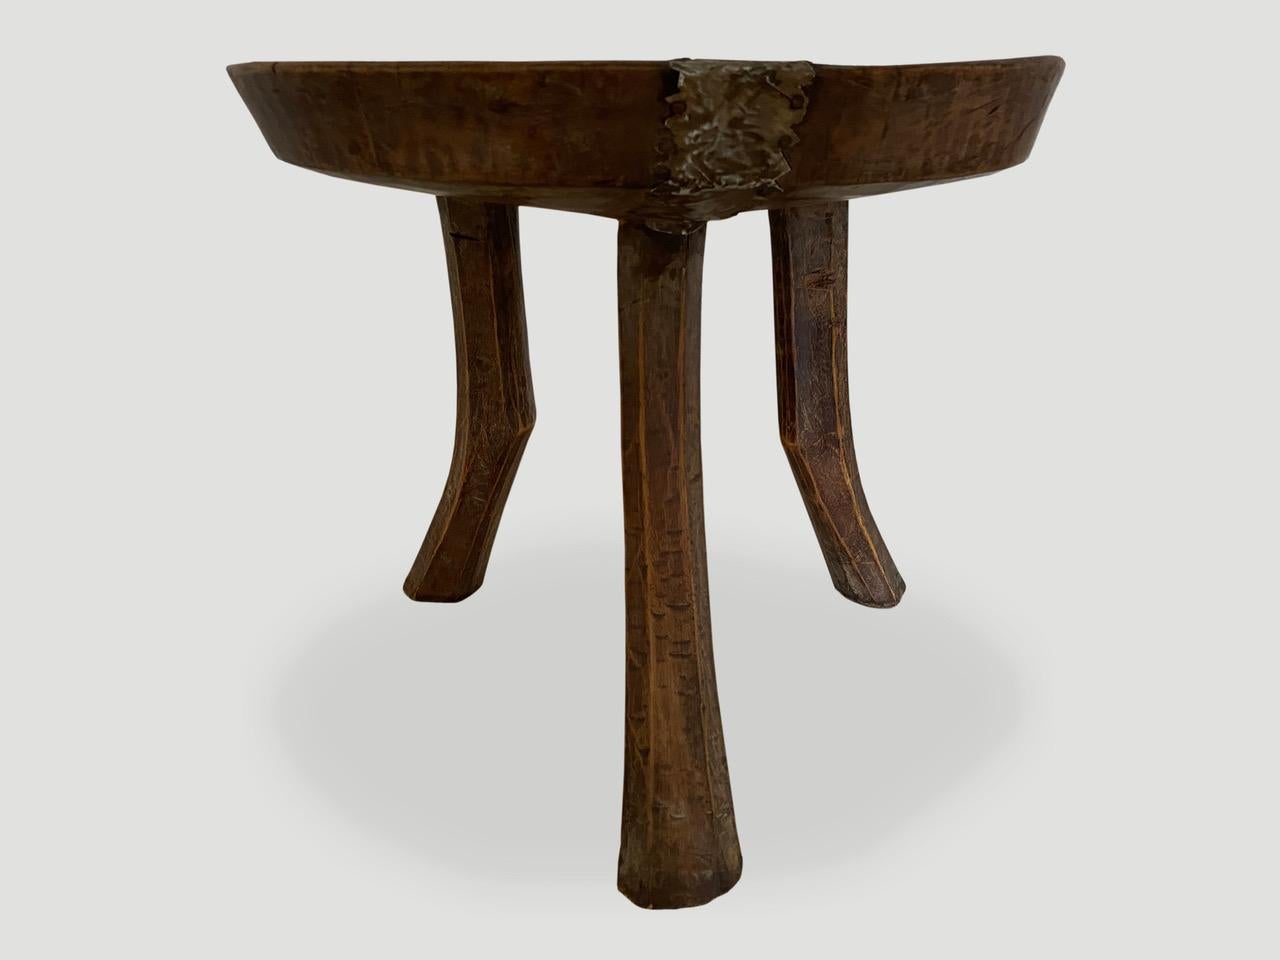 Antique African mahogany side table, hand carved from a single block of mahogany wood with lovely patina and tin overlay. A beautiful, versatile item that is both sculptural and usable.

This side table was sourced in the spirit of wabi-sabi, a